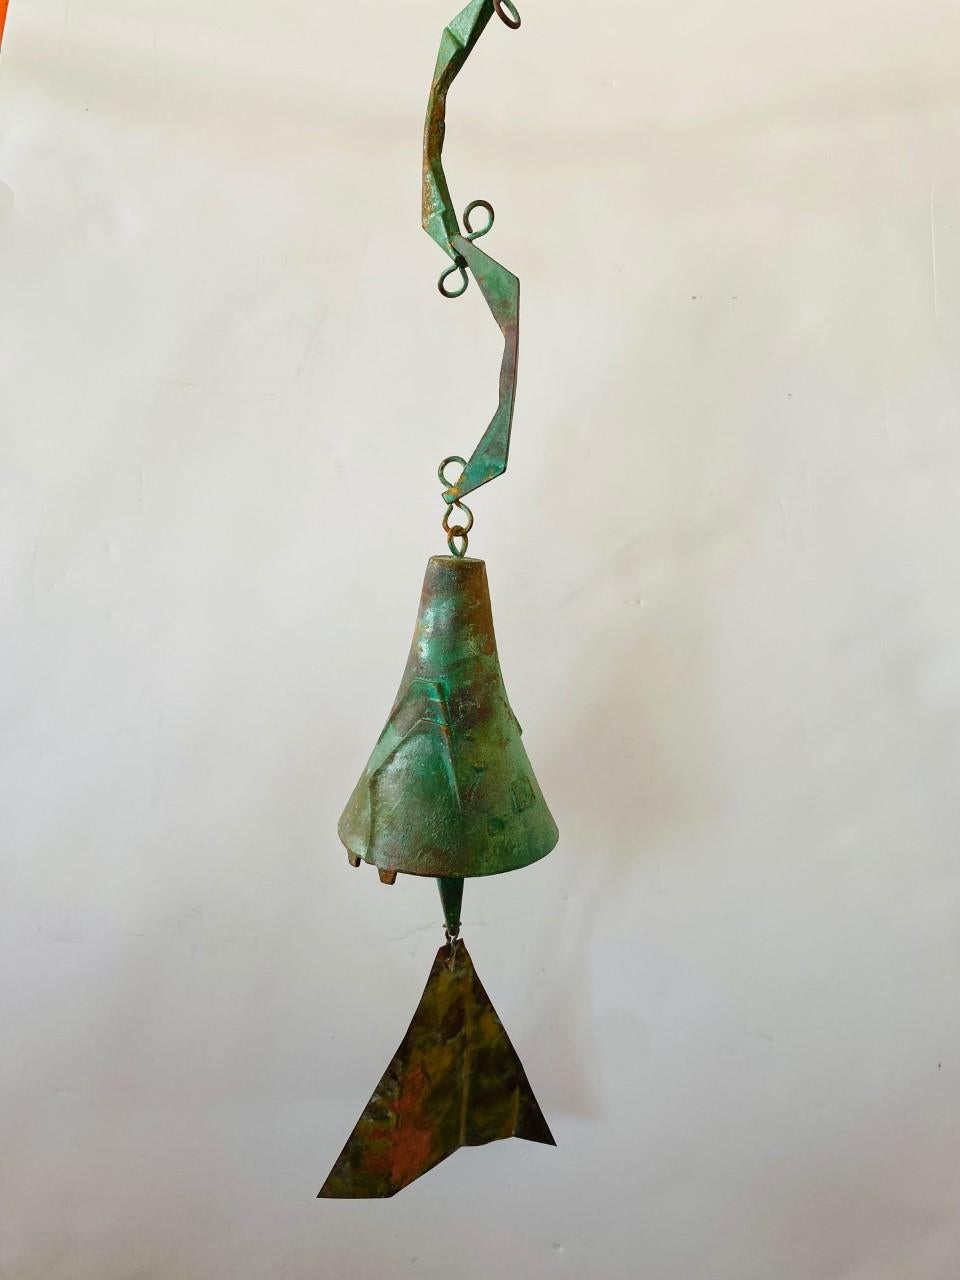 Beautiful bronze Cosanti bell by Paolo Soleri. Uncommon shape and design. Fantastic patina and a great sound. Signed. A unique piece from a celebrated artist. Unique attribute to this piece is a bluish green patina.

Paolo Soleri (1919-2013), the